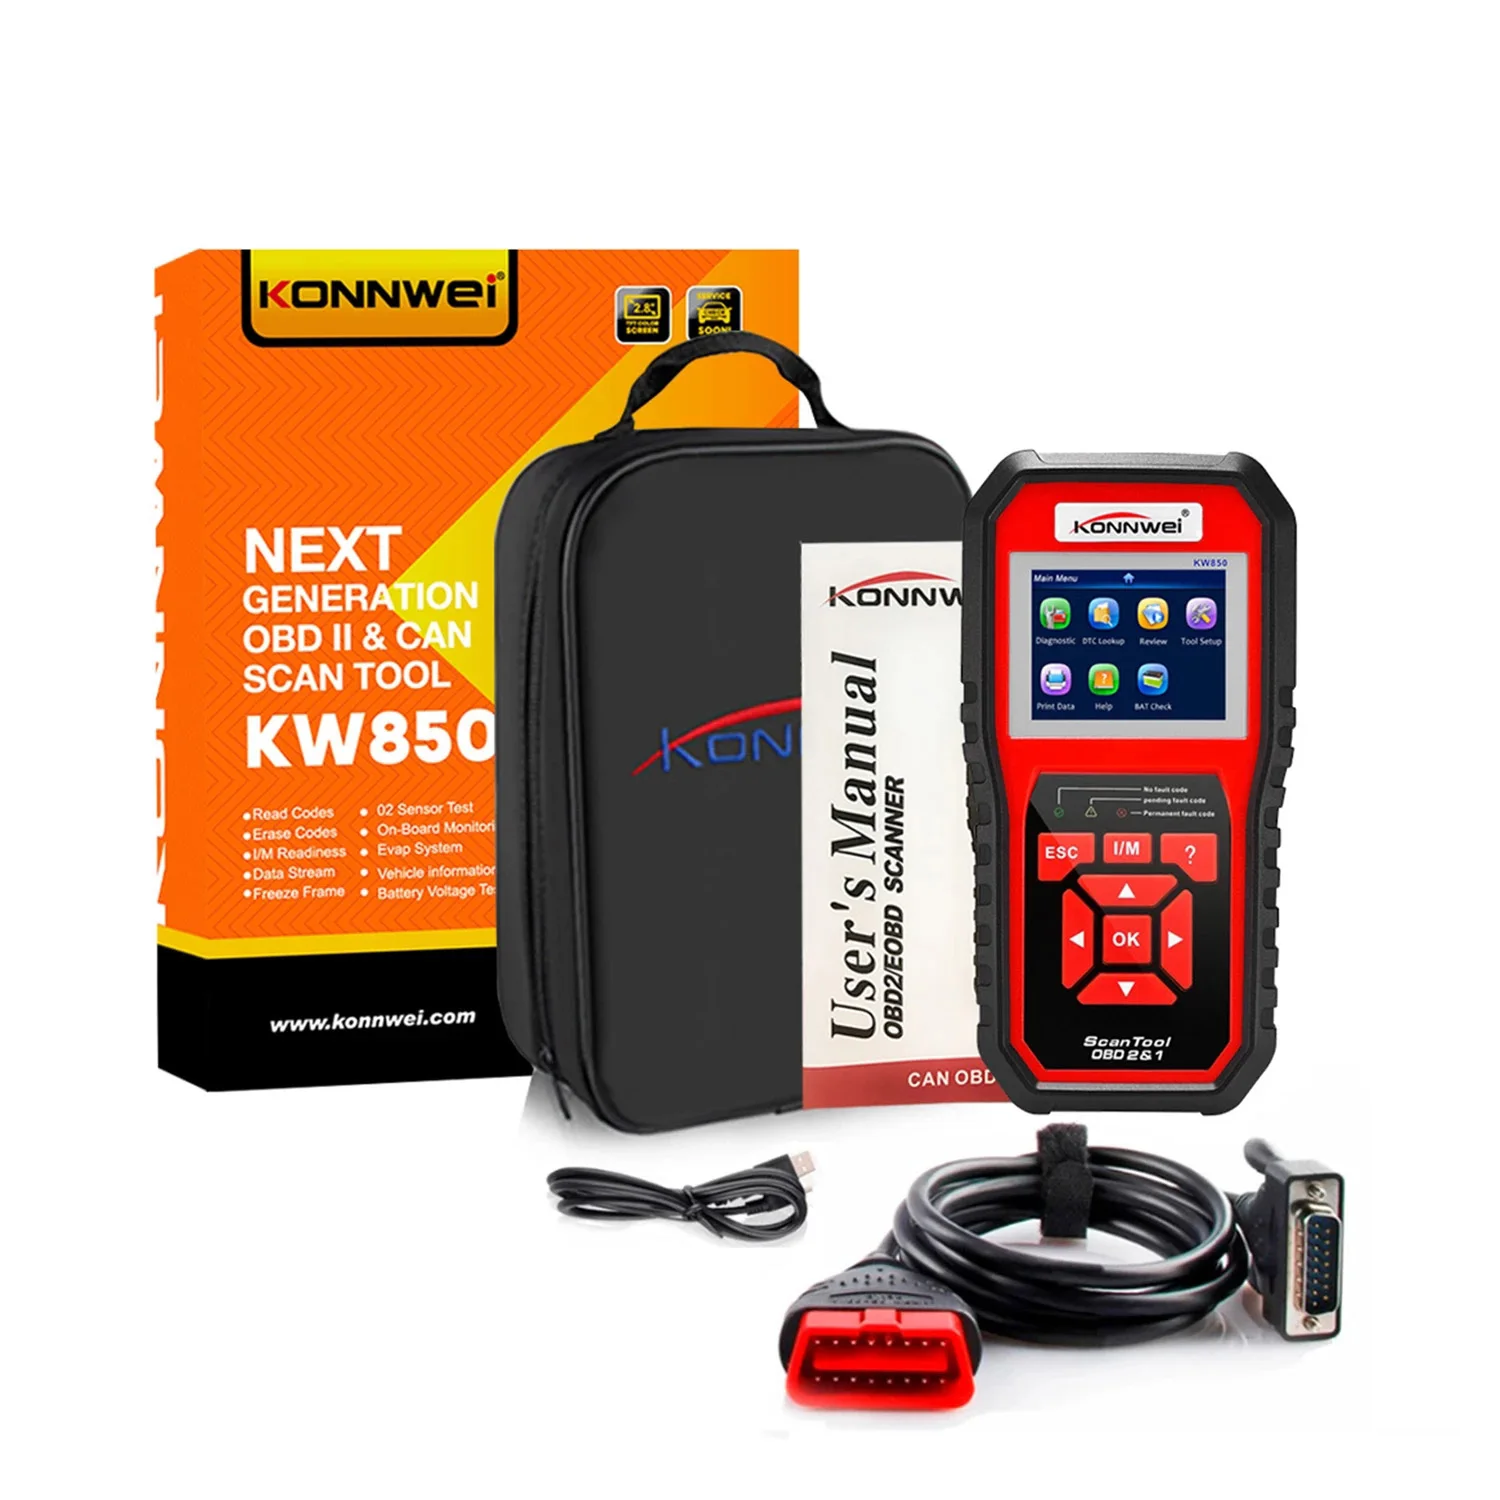 KONNWEI KW850 Obd2 Scanner Multi-languages Full OBD 2 Function Auto Diagnostic Tool Kw 850 Works Powerful And Free Shipping